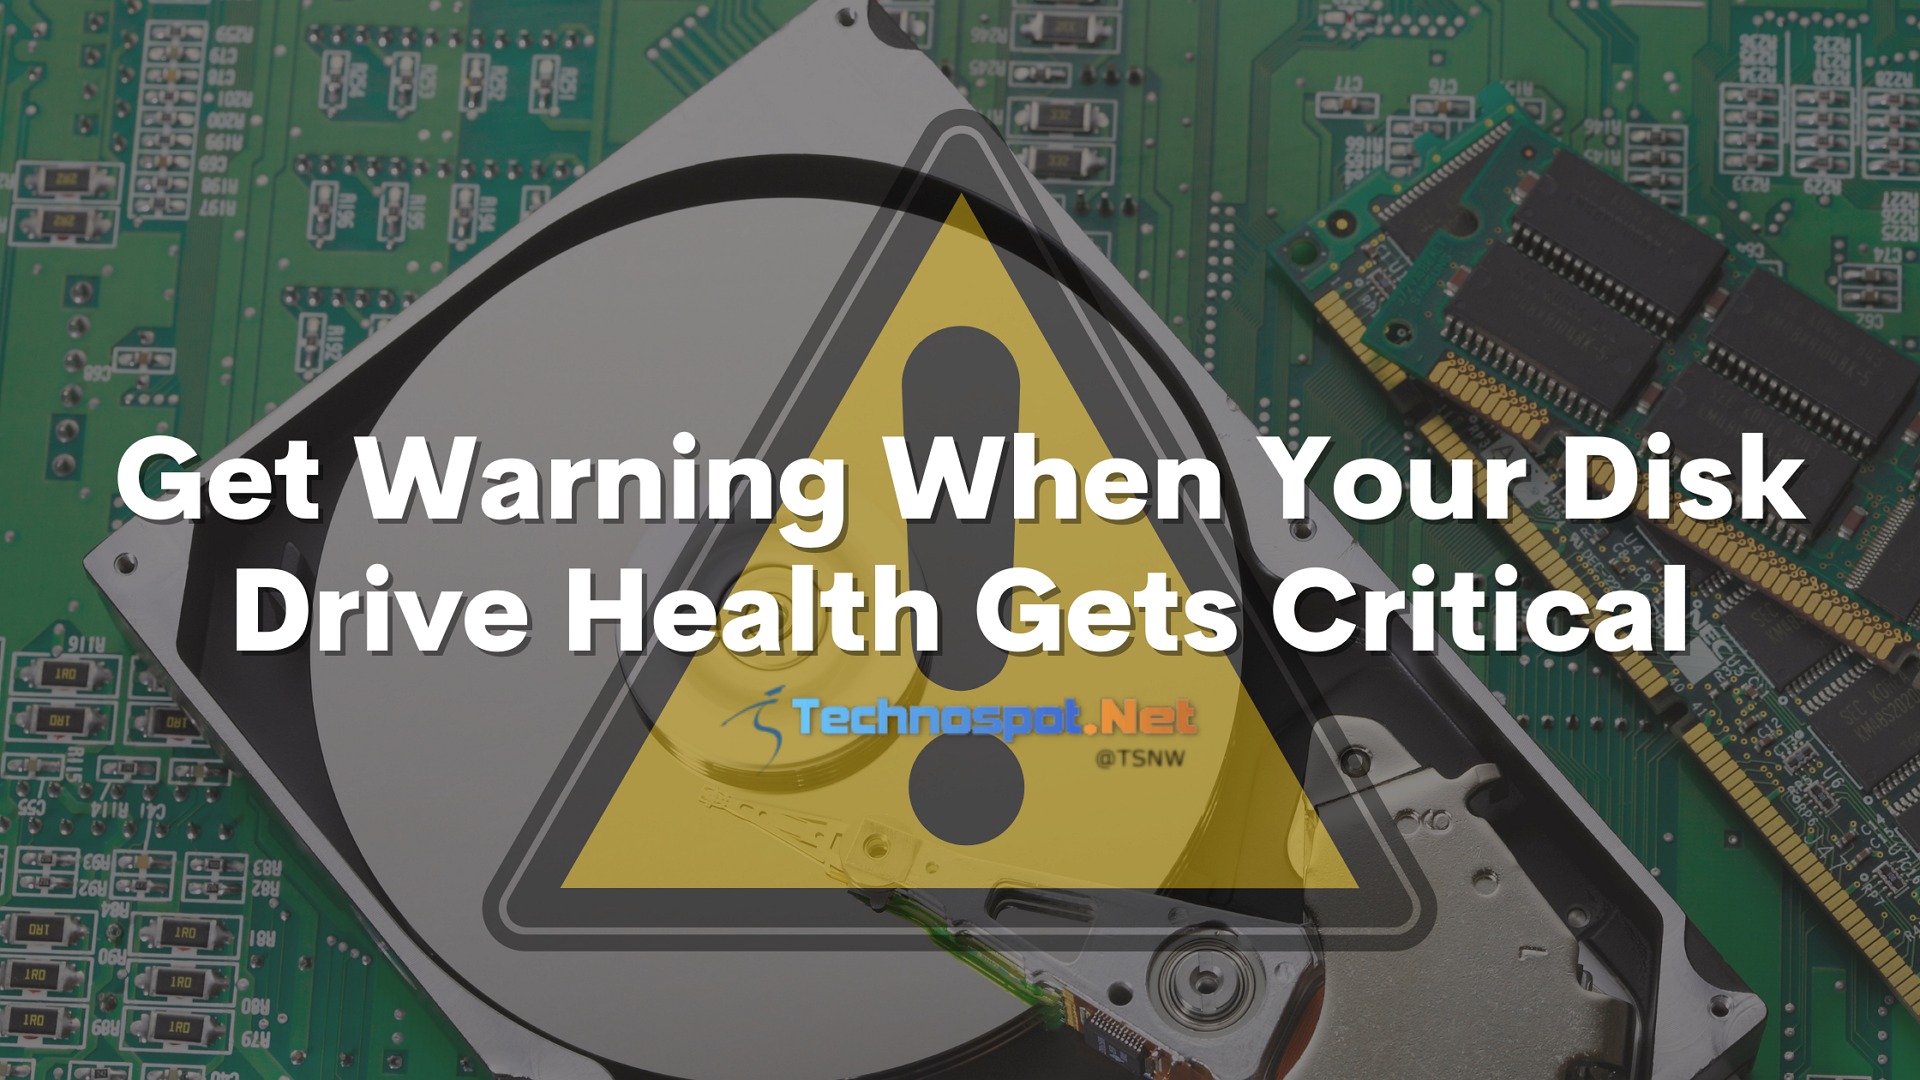 How To Get A Warning When Your Disk Drive Health Gets Critical